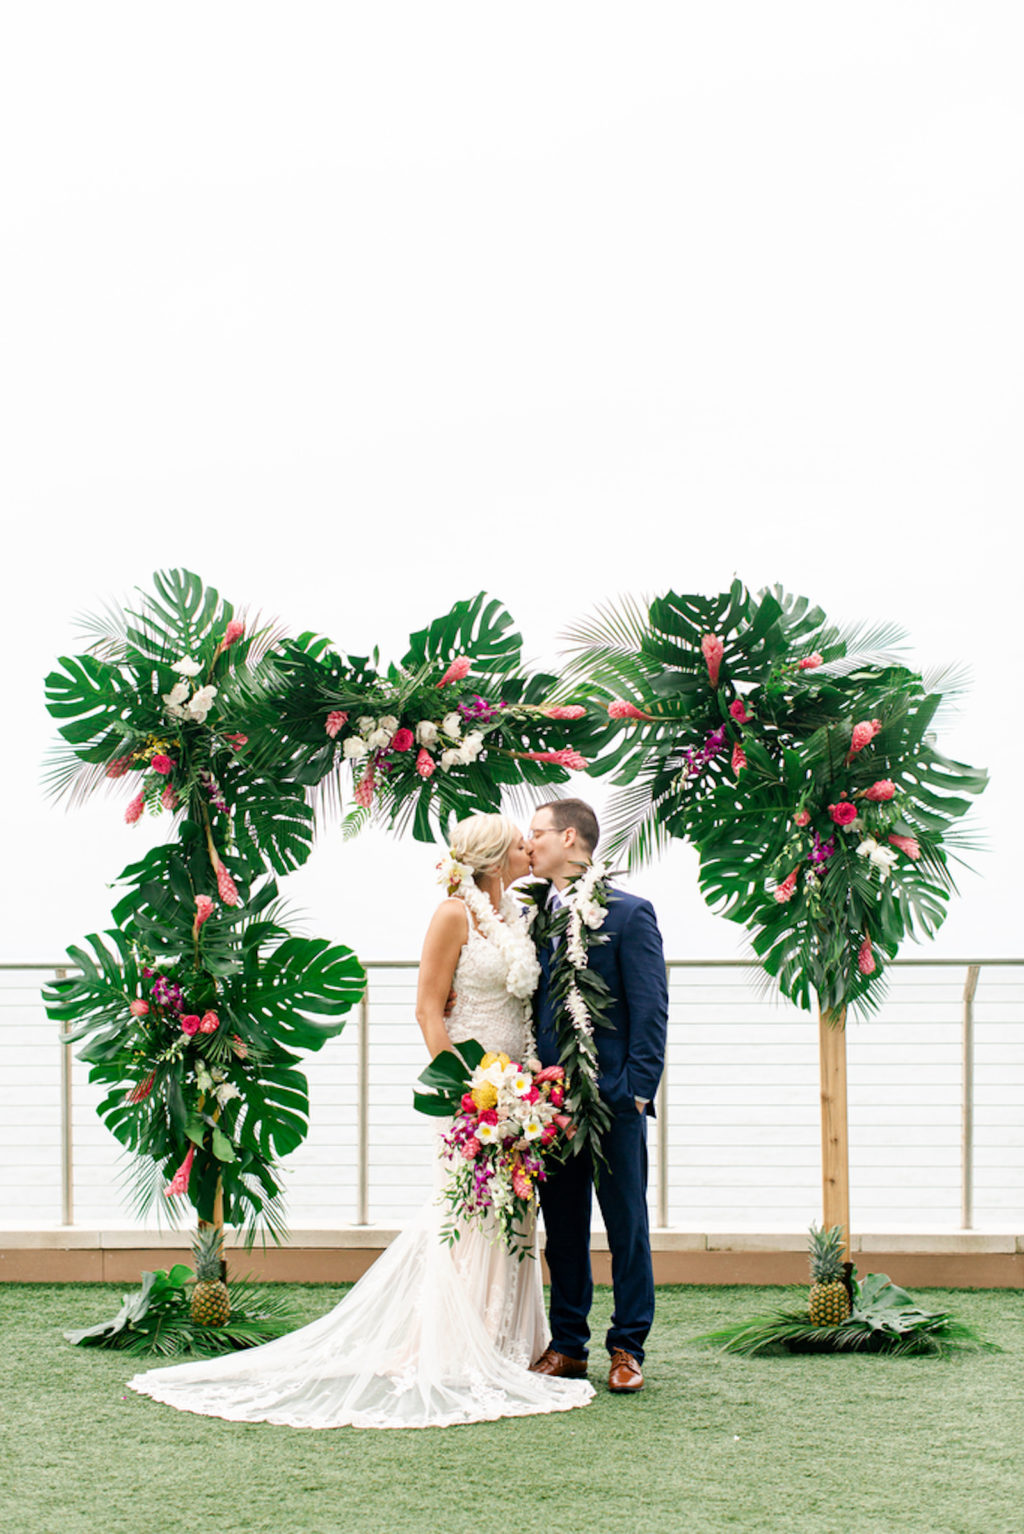 Tropical Elegant Waterfront Wedding Ceremony Decor, Bride Holding Lush and Colorful Bouquet and Groom Kiss Under Arch with Monstera Palm Tree Leaves, Pink Ginger, Purple Orchids, White Flowers | Tampa Bay Wedding Planner Special Moments Event Planner | Clearwater Beach Opal Sands Resort